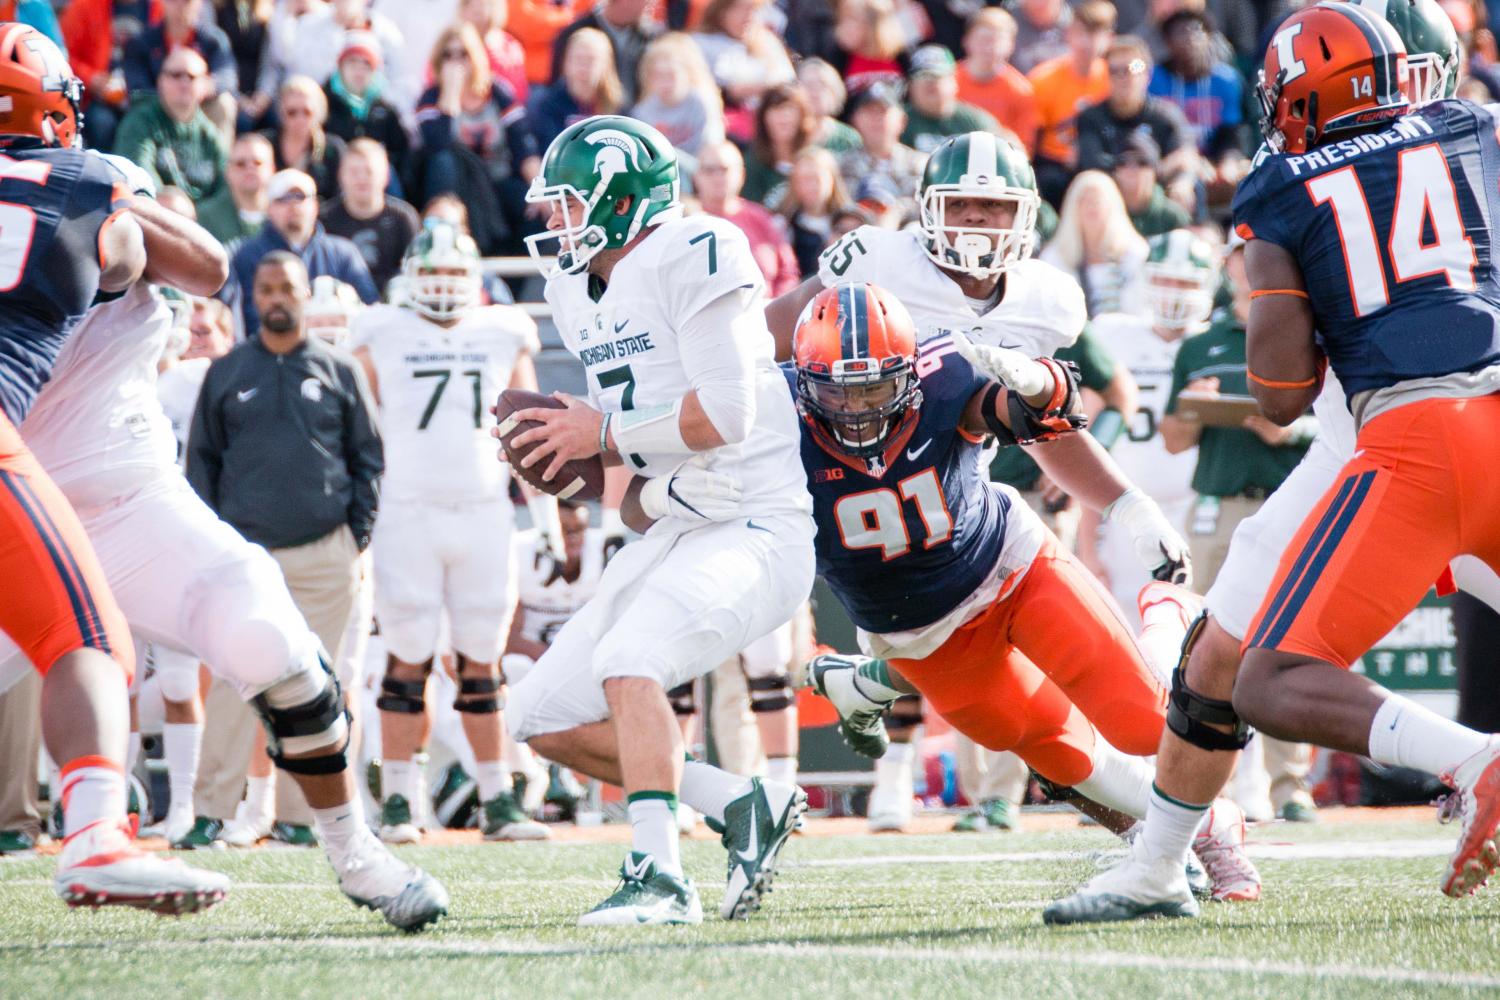 Illinois+defensive+lineman+Dawuane+Smoot+tackles+Michigan+State+quarterback+Tyler+O%E2%80%99Connor+at+Memorial+Stadium+on+Nov.+5%2C+2016.+The+Jacksonville+Jaguars+selected+Smoot+in+the+third+round+of+this+year%E2%80%99s+NFL+Draft.+